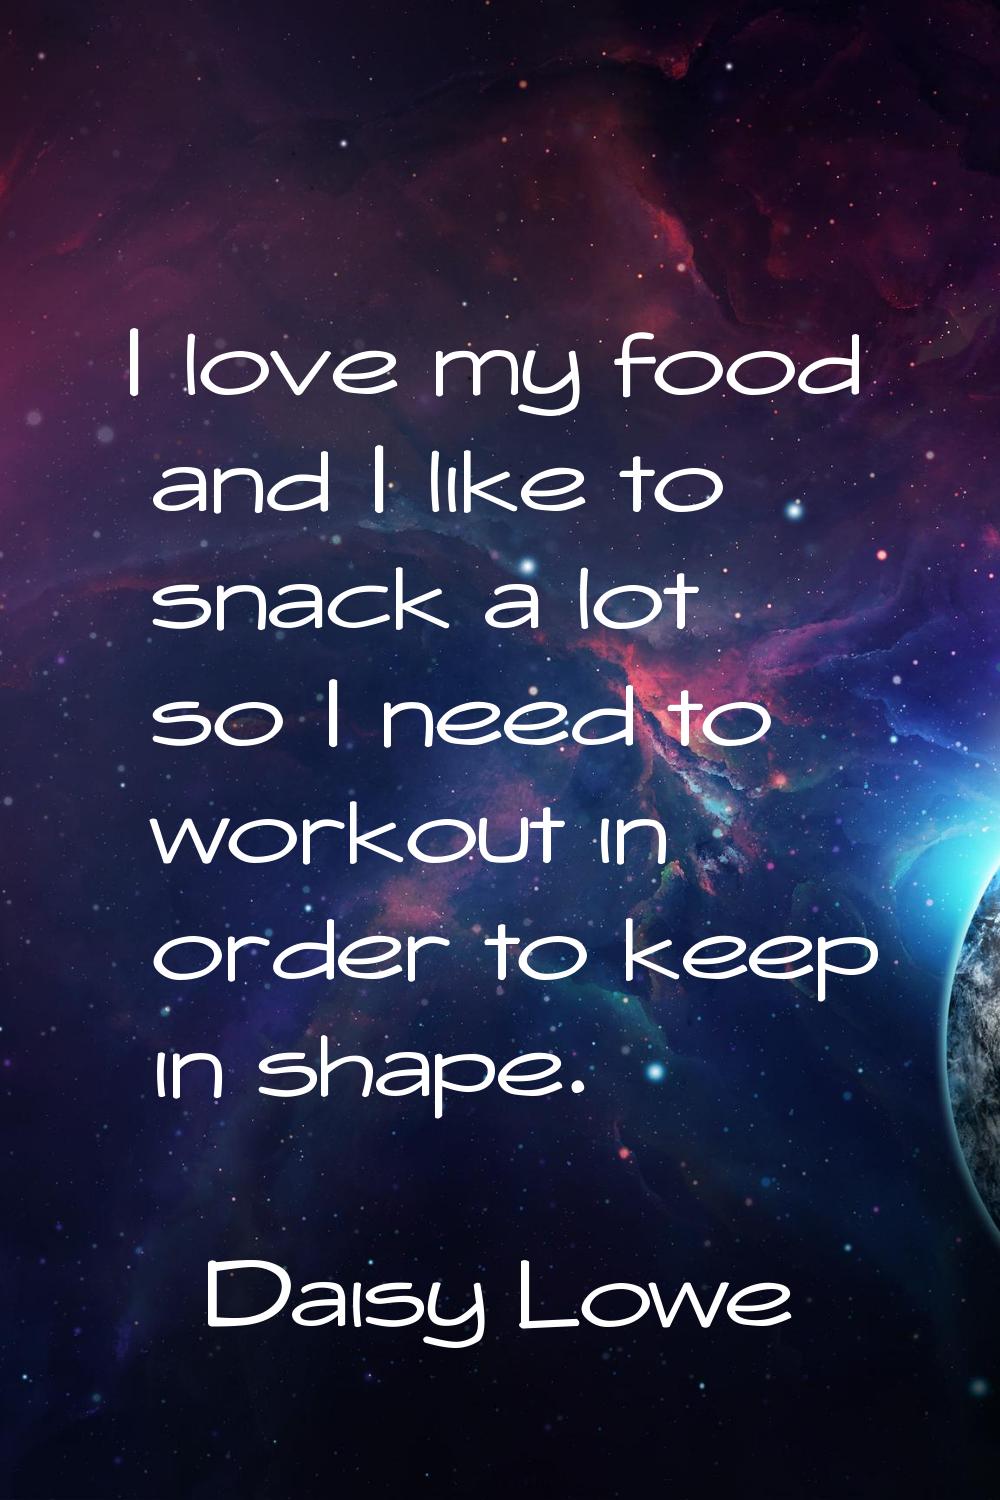 I love my food and I like to snack a lot so I need to workout in order to keep in shape.